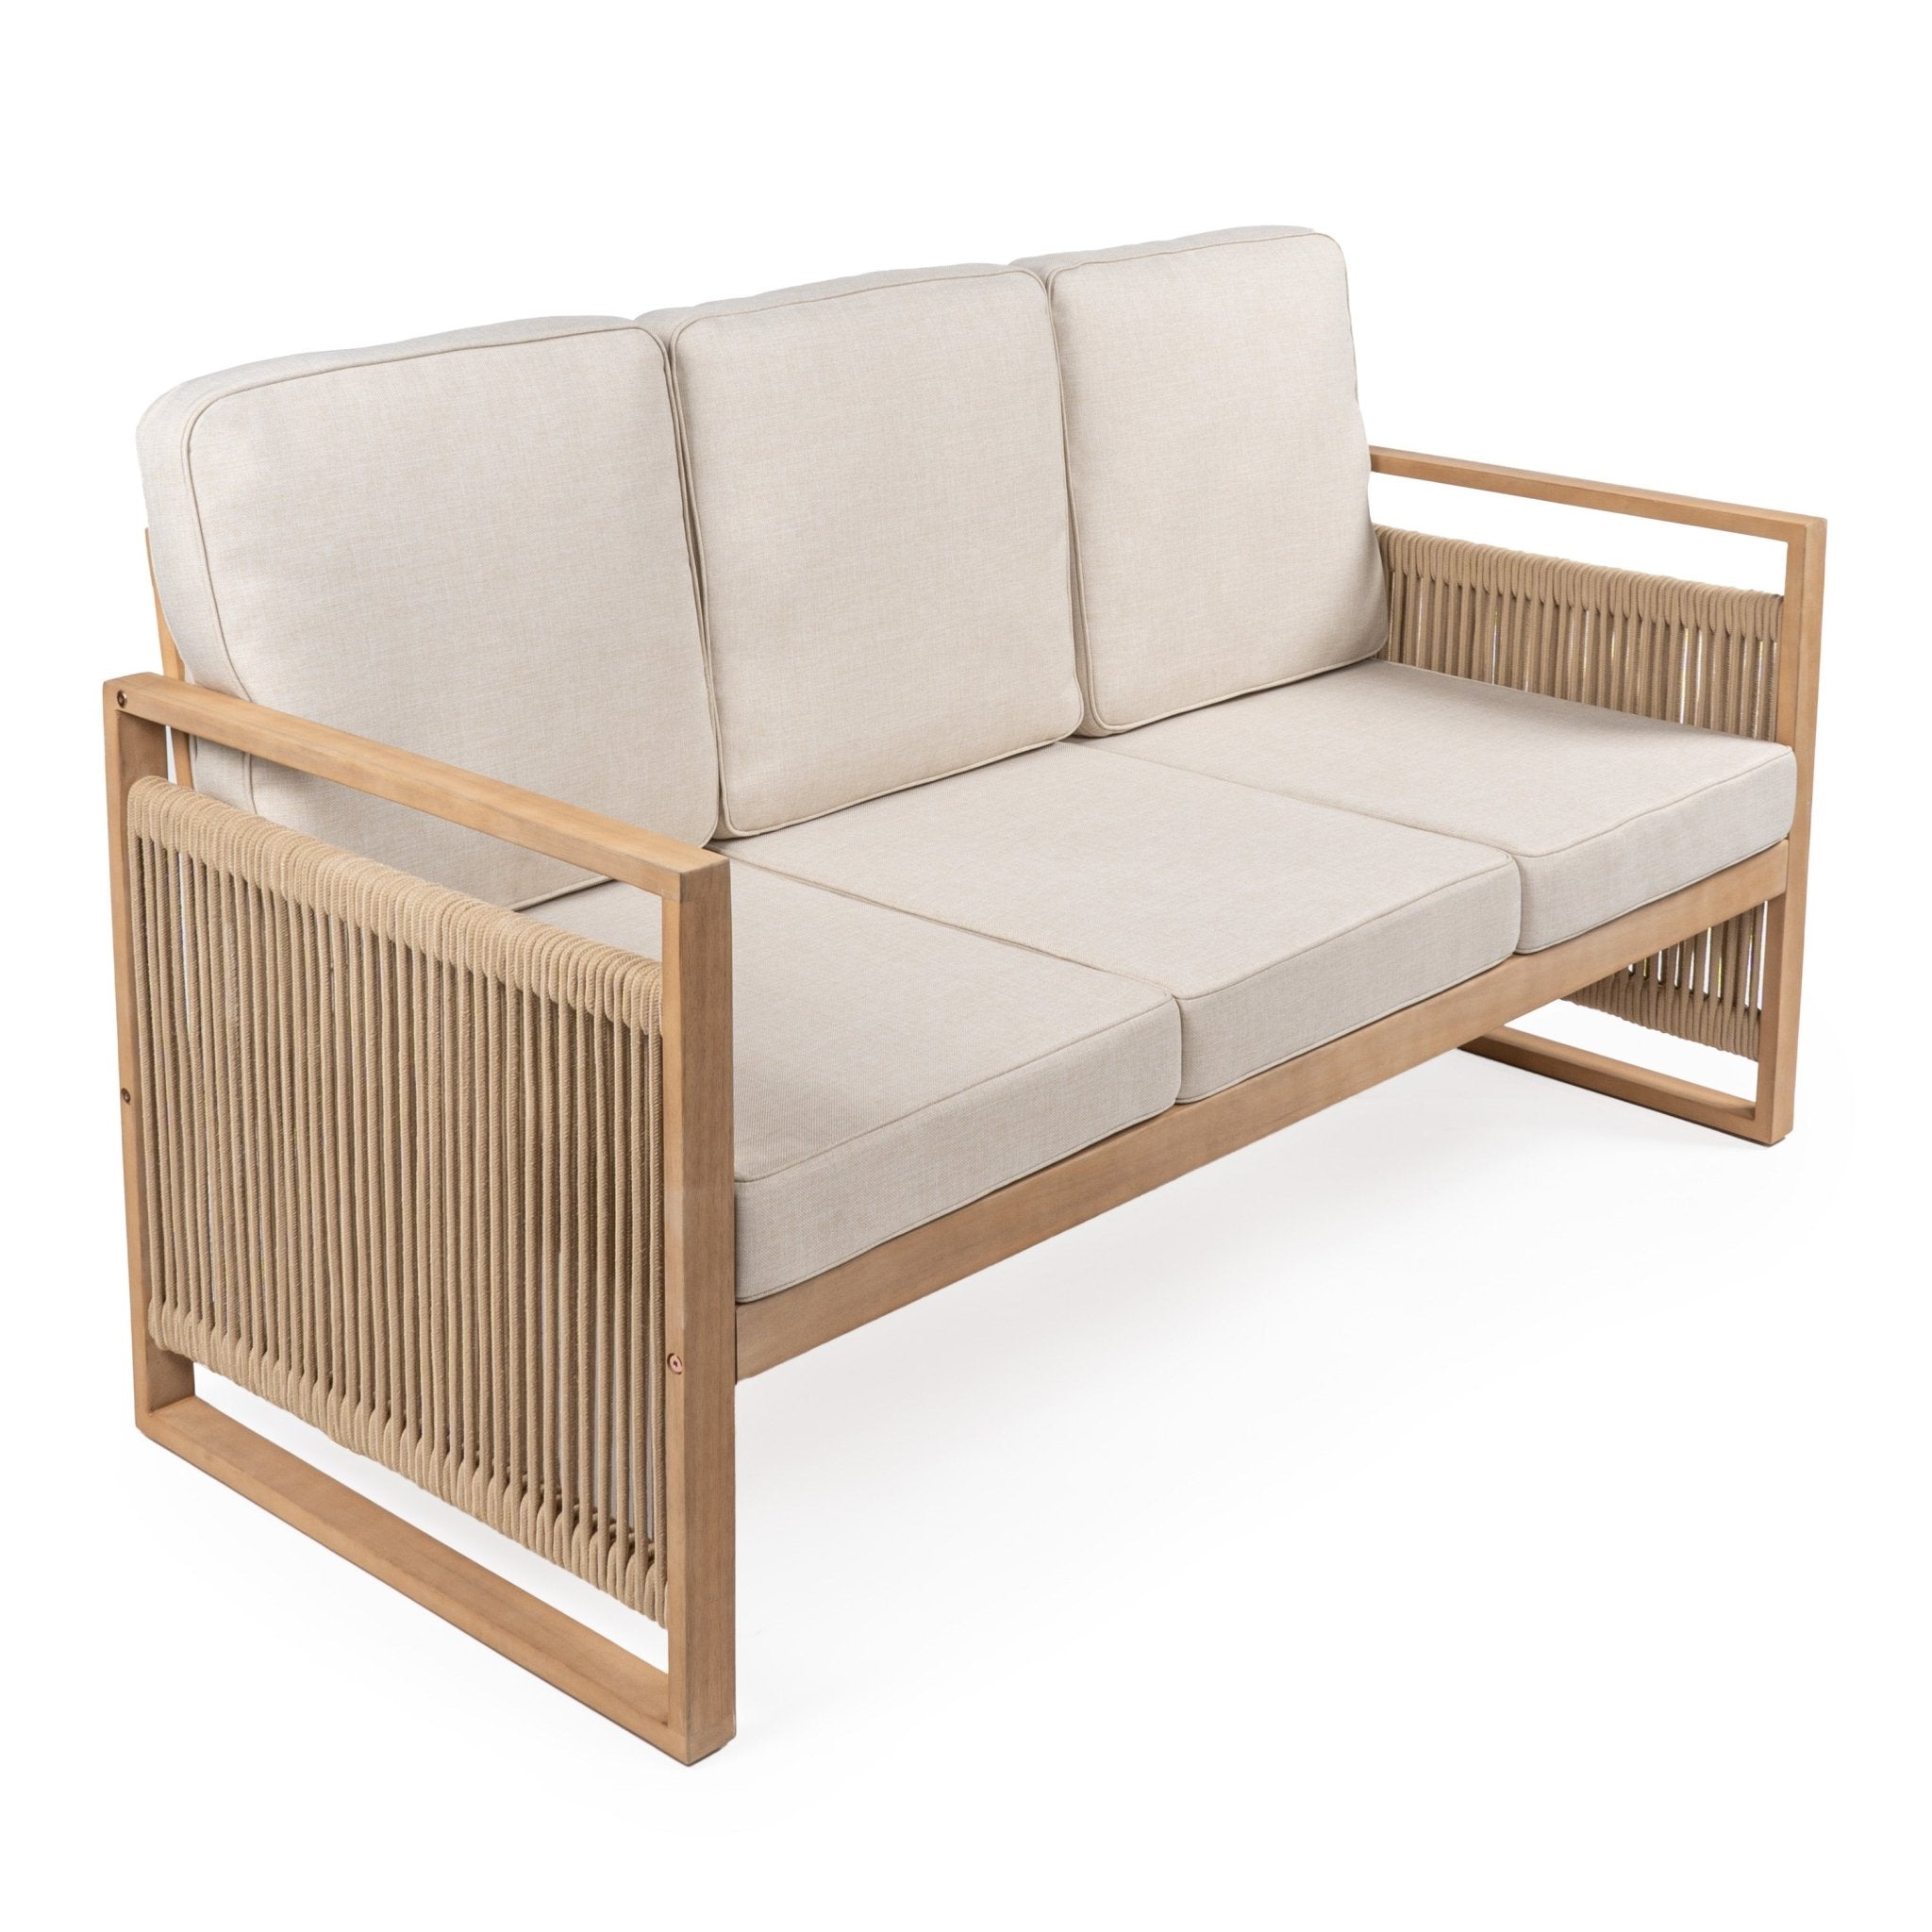 Gable 3-Seat Mid-Century Modern Roped Acacia Wood Outdoor Sofa with Cushions, Gray/Teak Brown - Outdoor Sofa